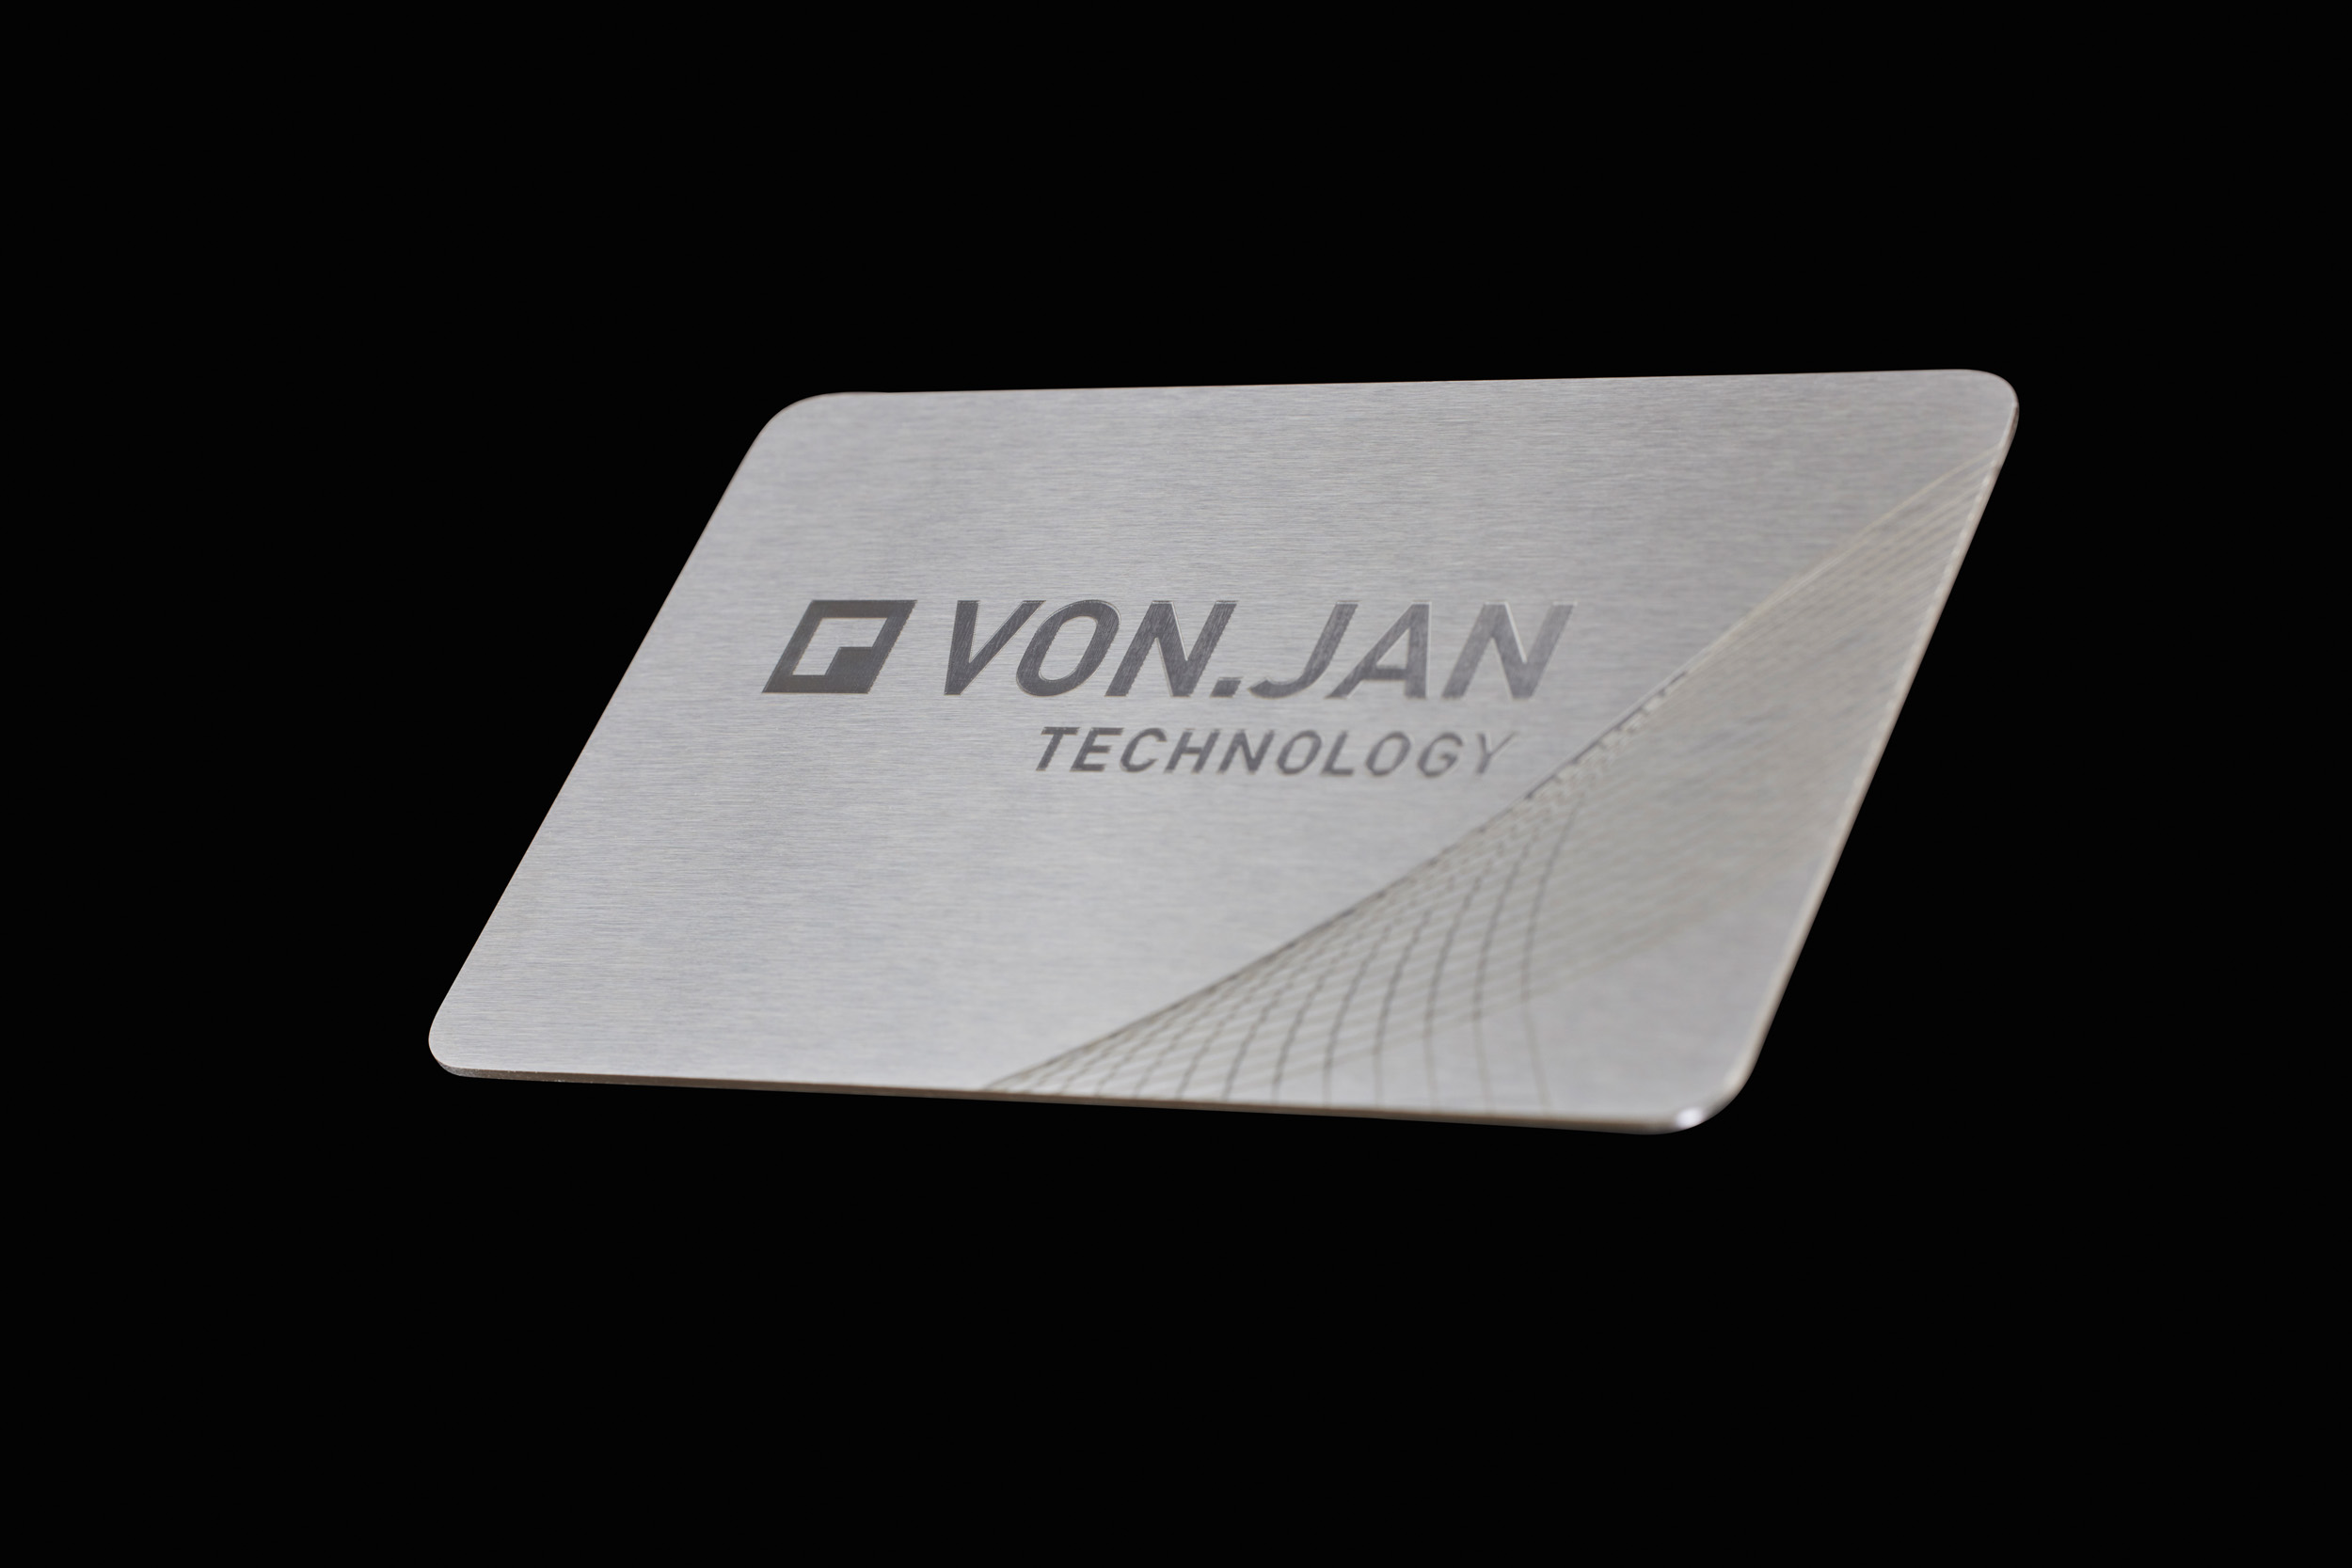 Polishing marking of the VONJAN logo on a stainless steel card